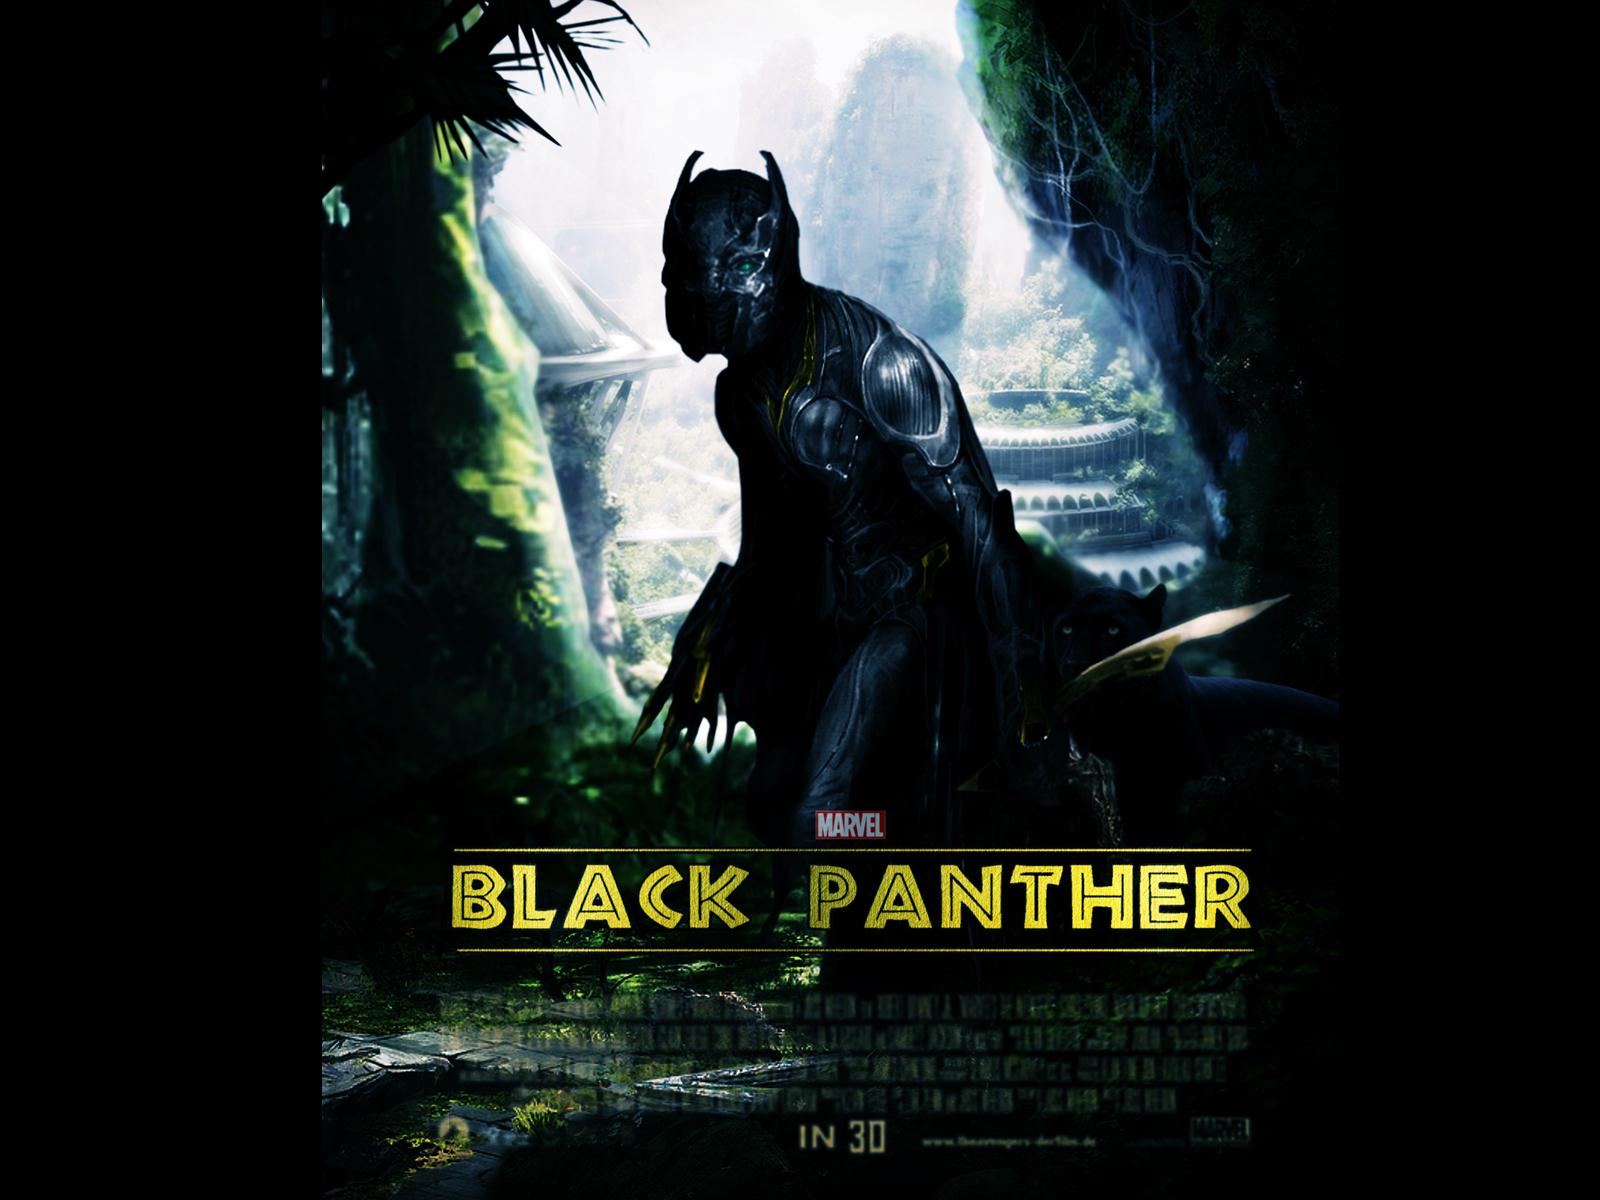 Marvel Black Panther Movie Poster HD Wallpaper Search